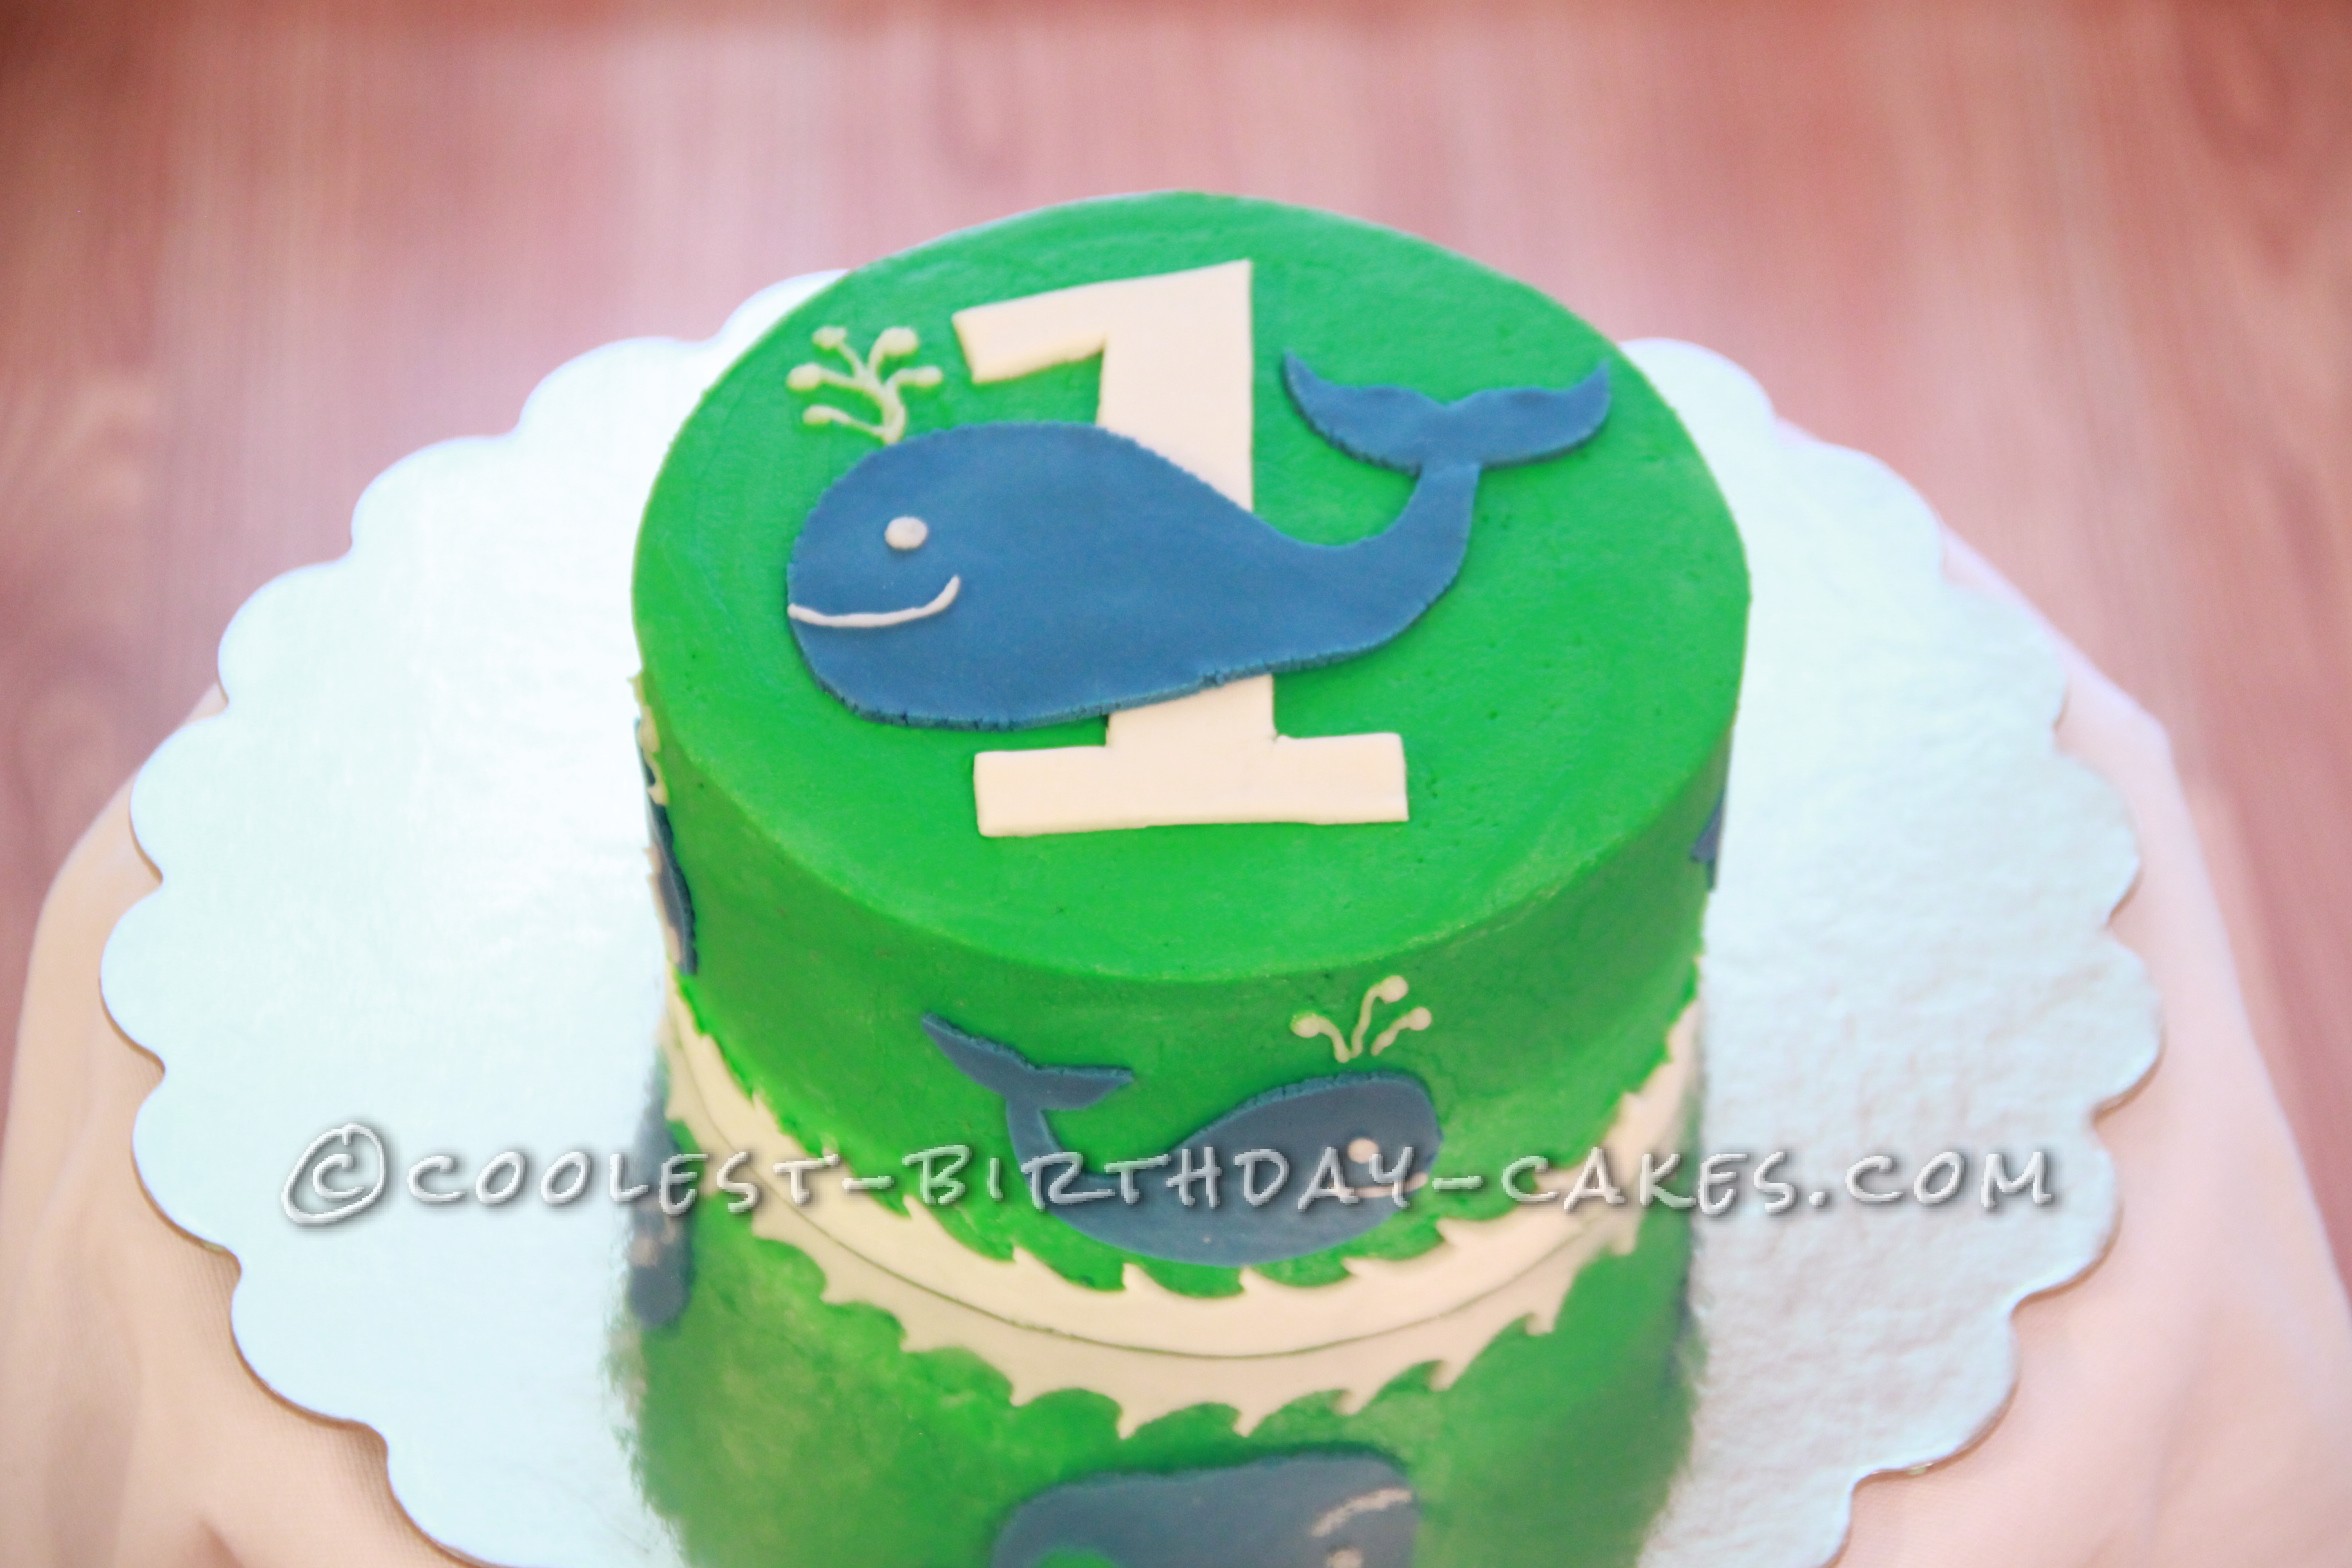 A "Whale" of a 1st Birthday Cake